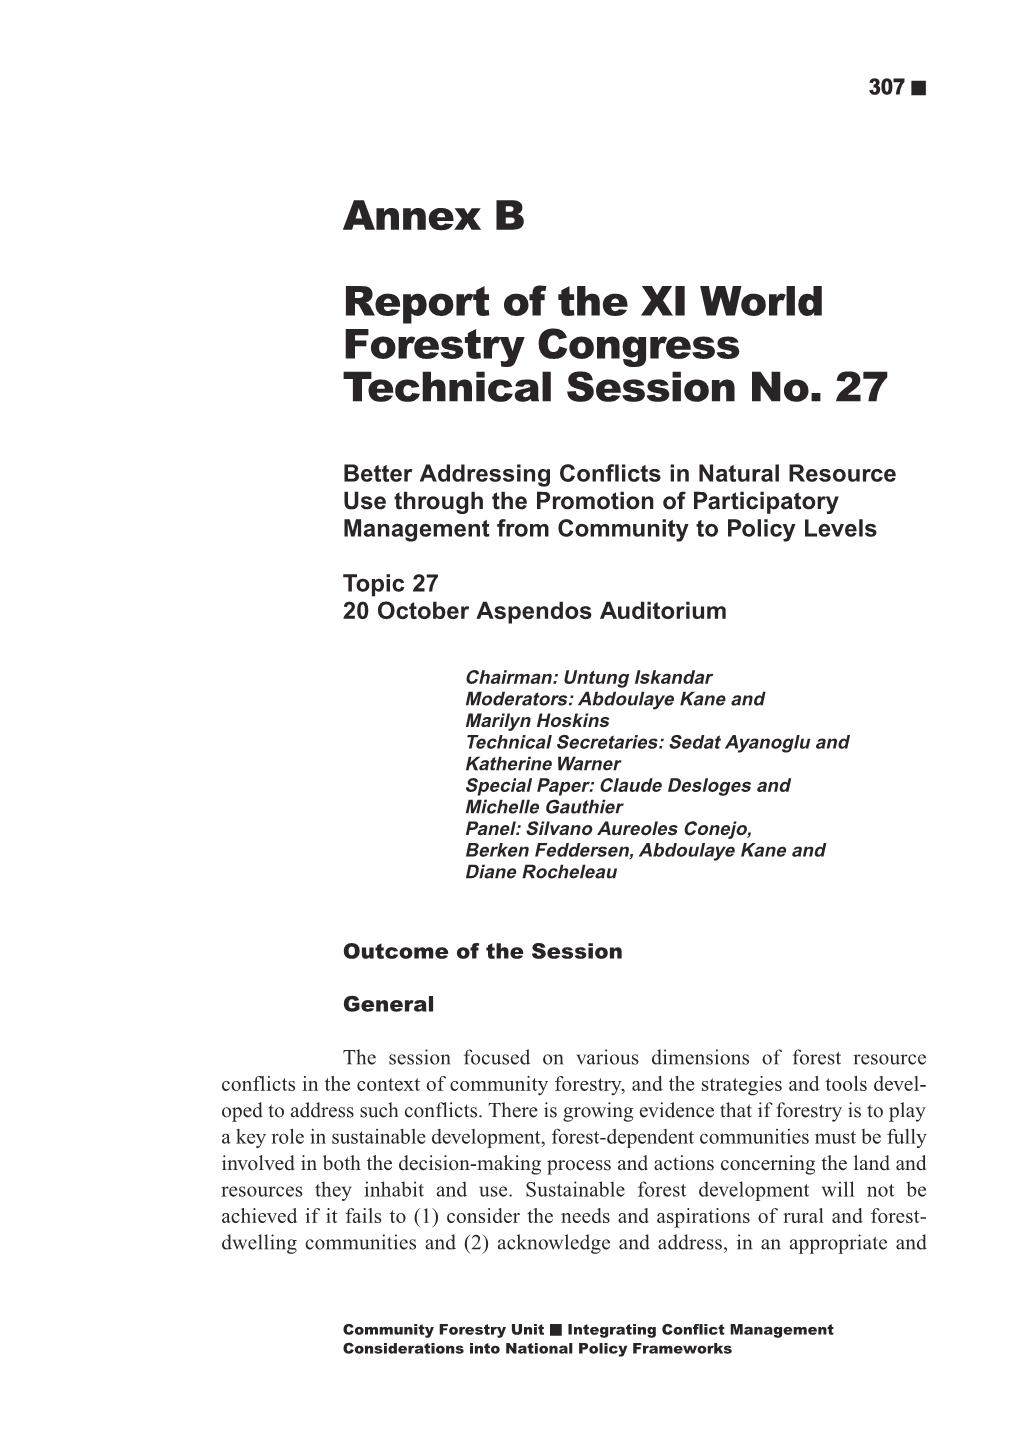 Annex B Report of the XI World Forestry Congress Technical